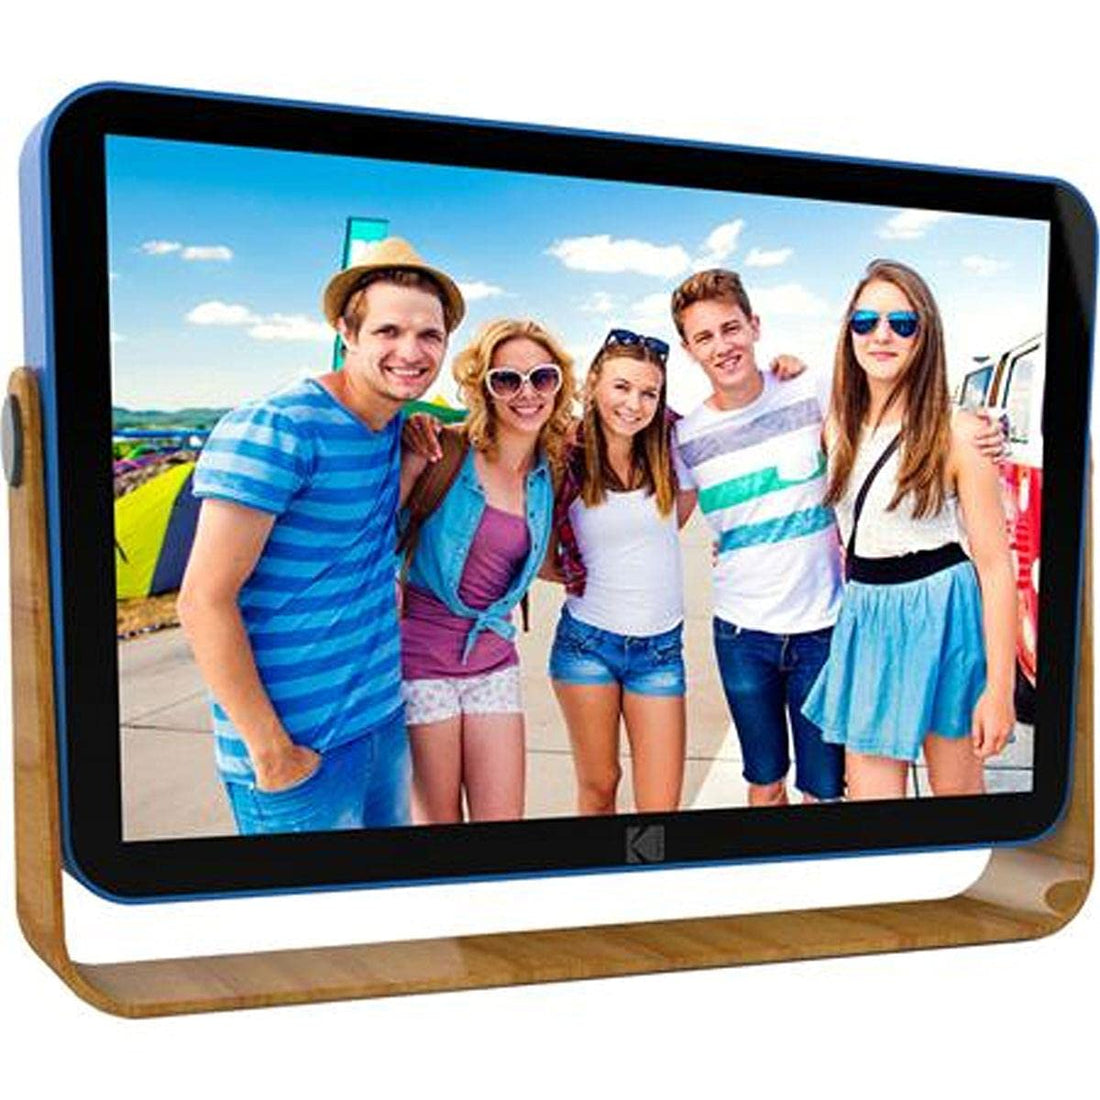 Kodak 10-Inch Smart Touch Screen Rechargeable Digital Picture Frame, Wi-Fi Enabled with HD Photo Display and Music/Video Support, Calendar, Weather and Location Updates (RWF-108) - Ocean Blue